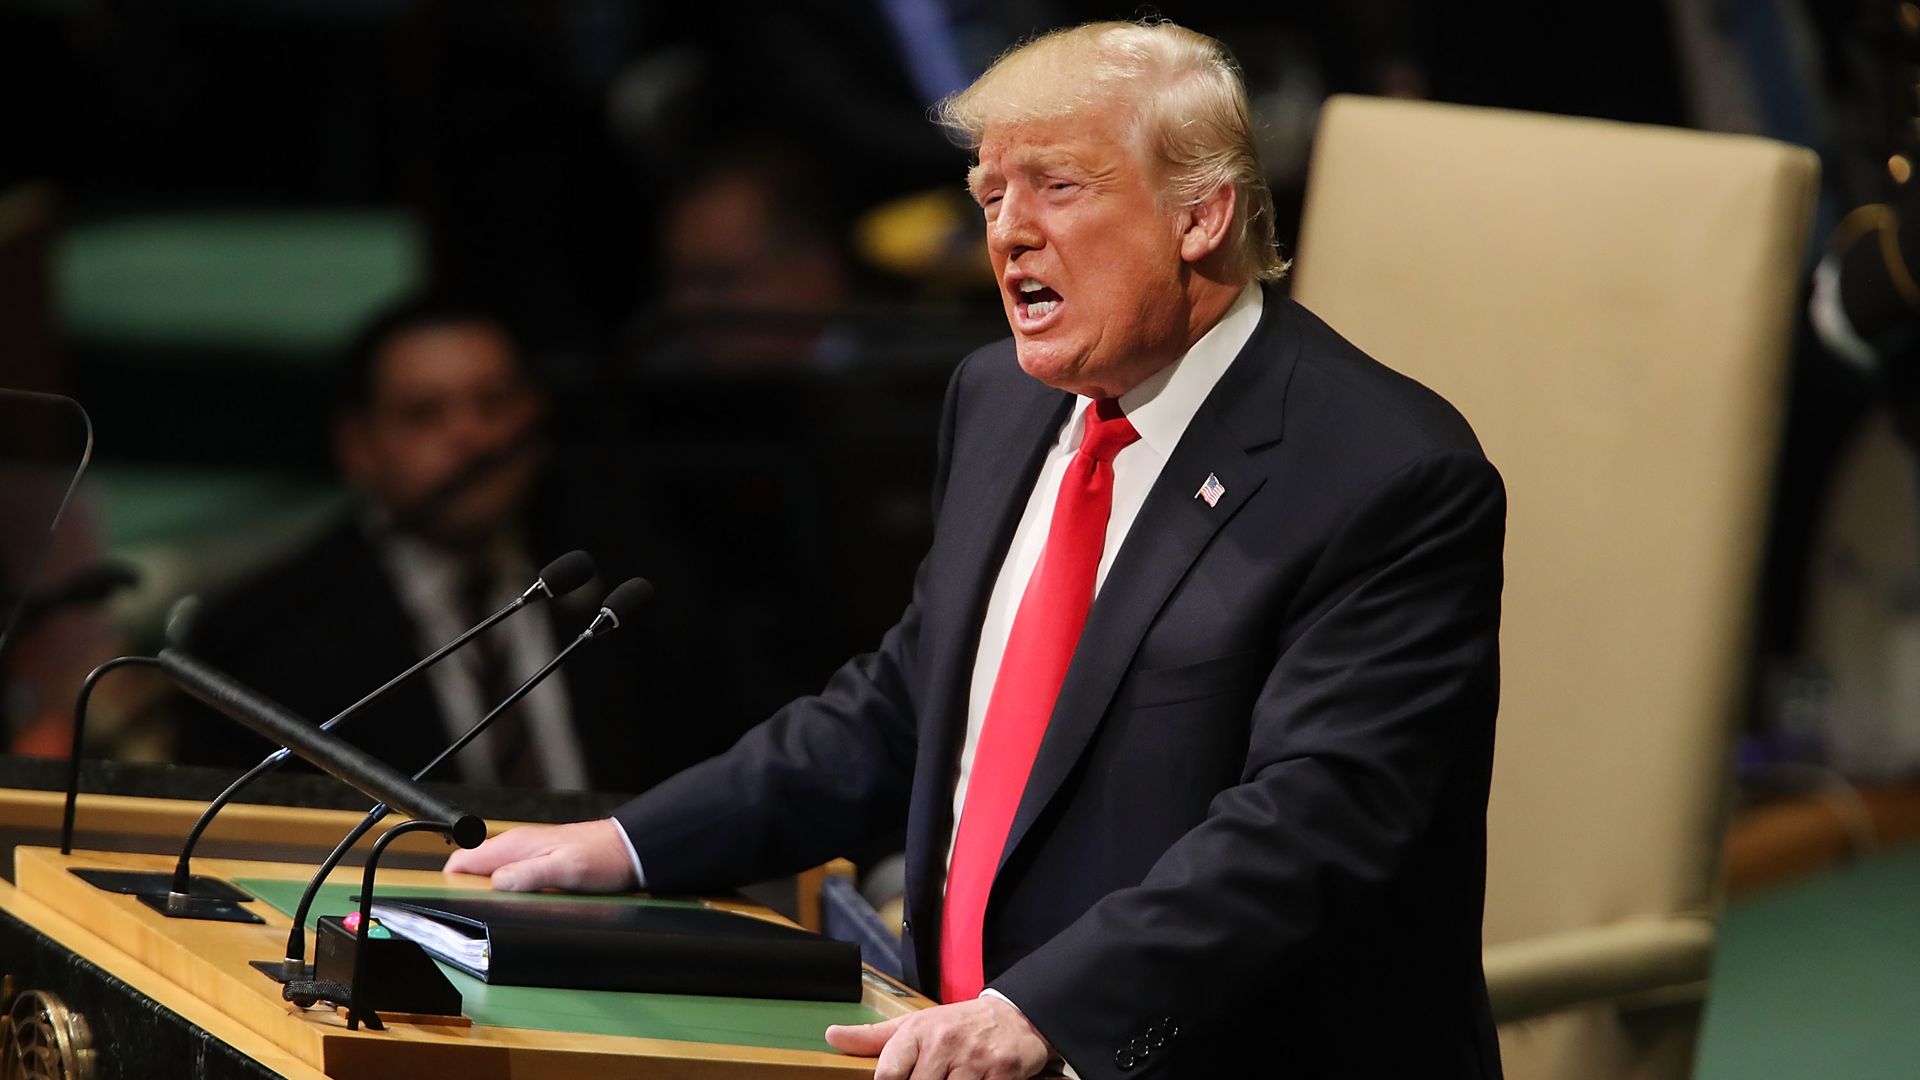 President Donald Trump addresses the 73rd United Nations (U.N.) General Assembly on September 25, 2018 in New York City.